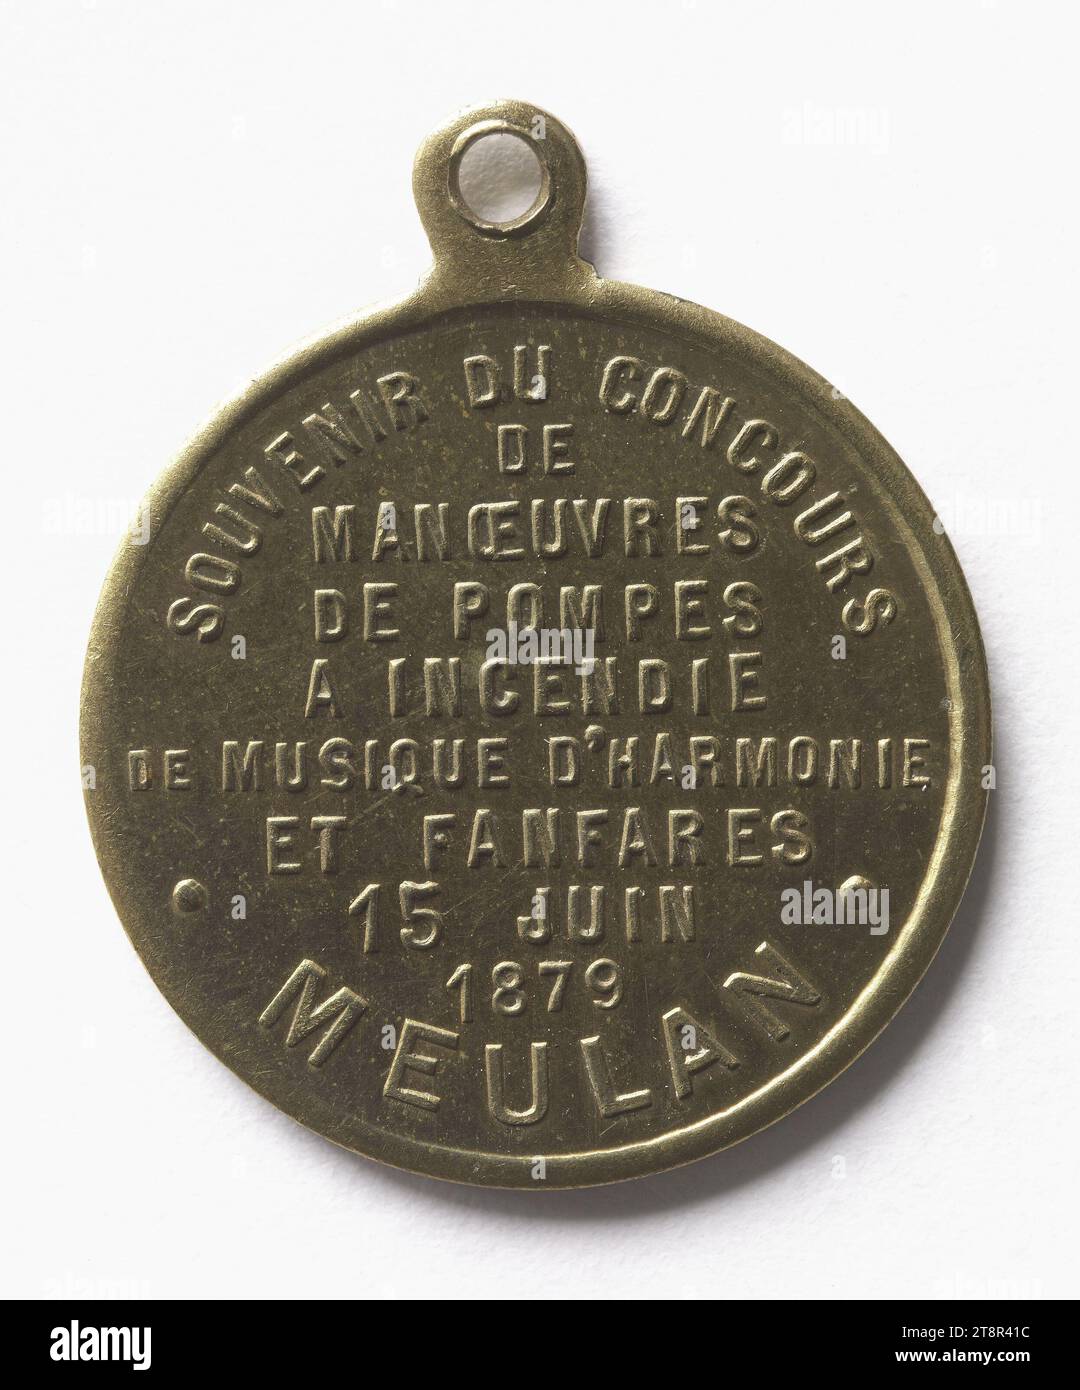 Souvenir of the fire pump drill contest in Meulan, June 15, 1879, Array, Numismatic, Medal, Copper, Gilt = gilding, Dimensions - Work: Diameter: 3.3 cm, Weight (type dimension): 8.7 g Stock Photo